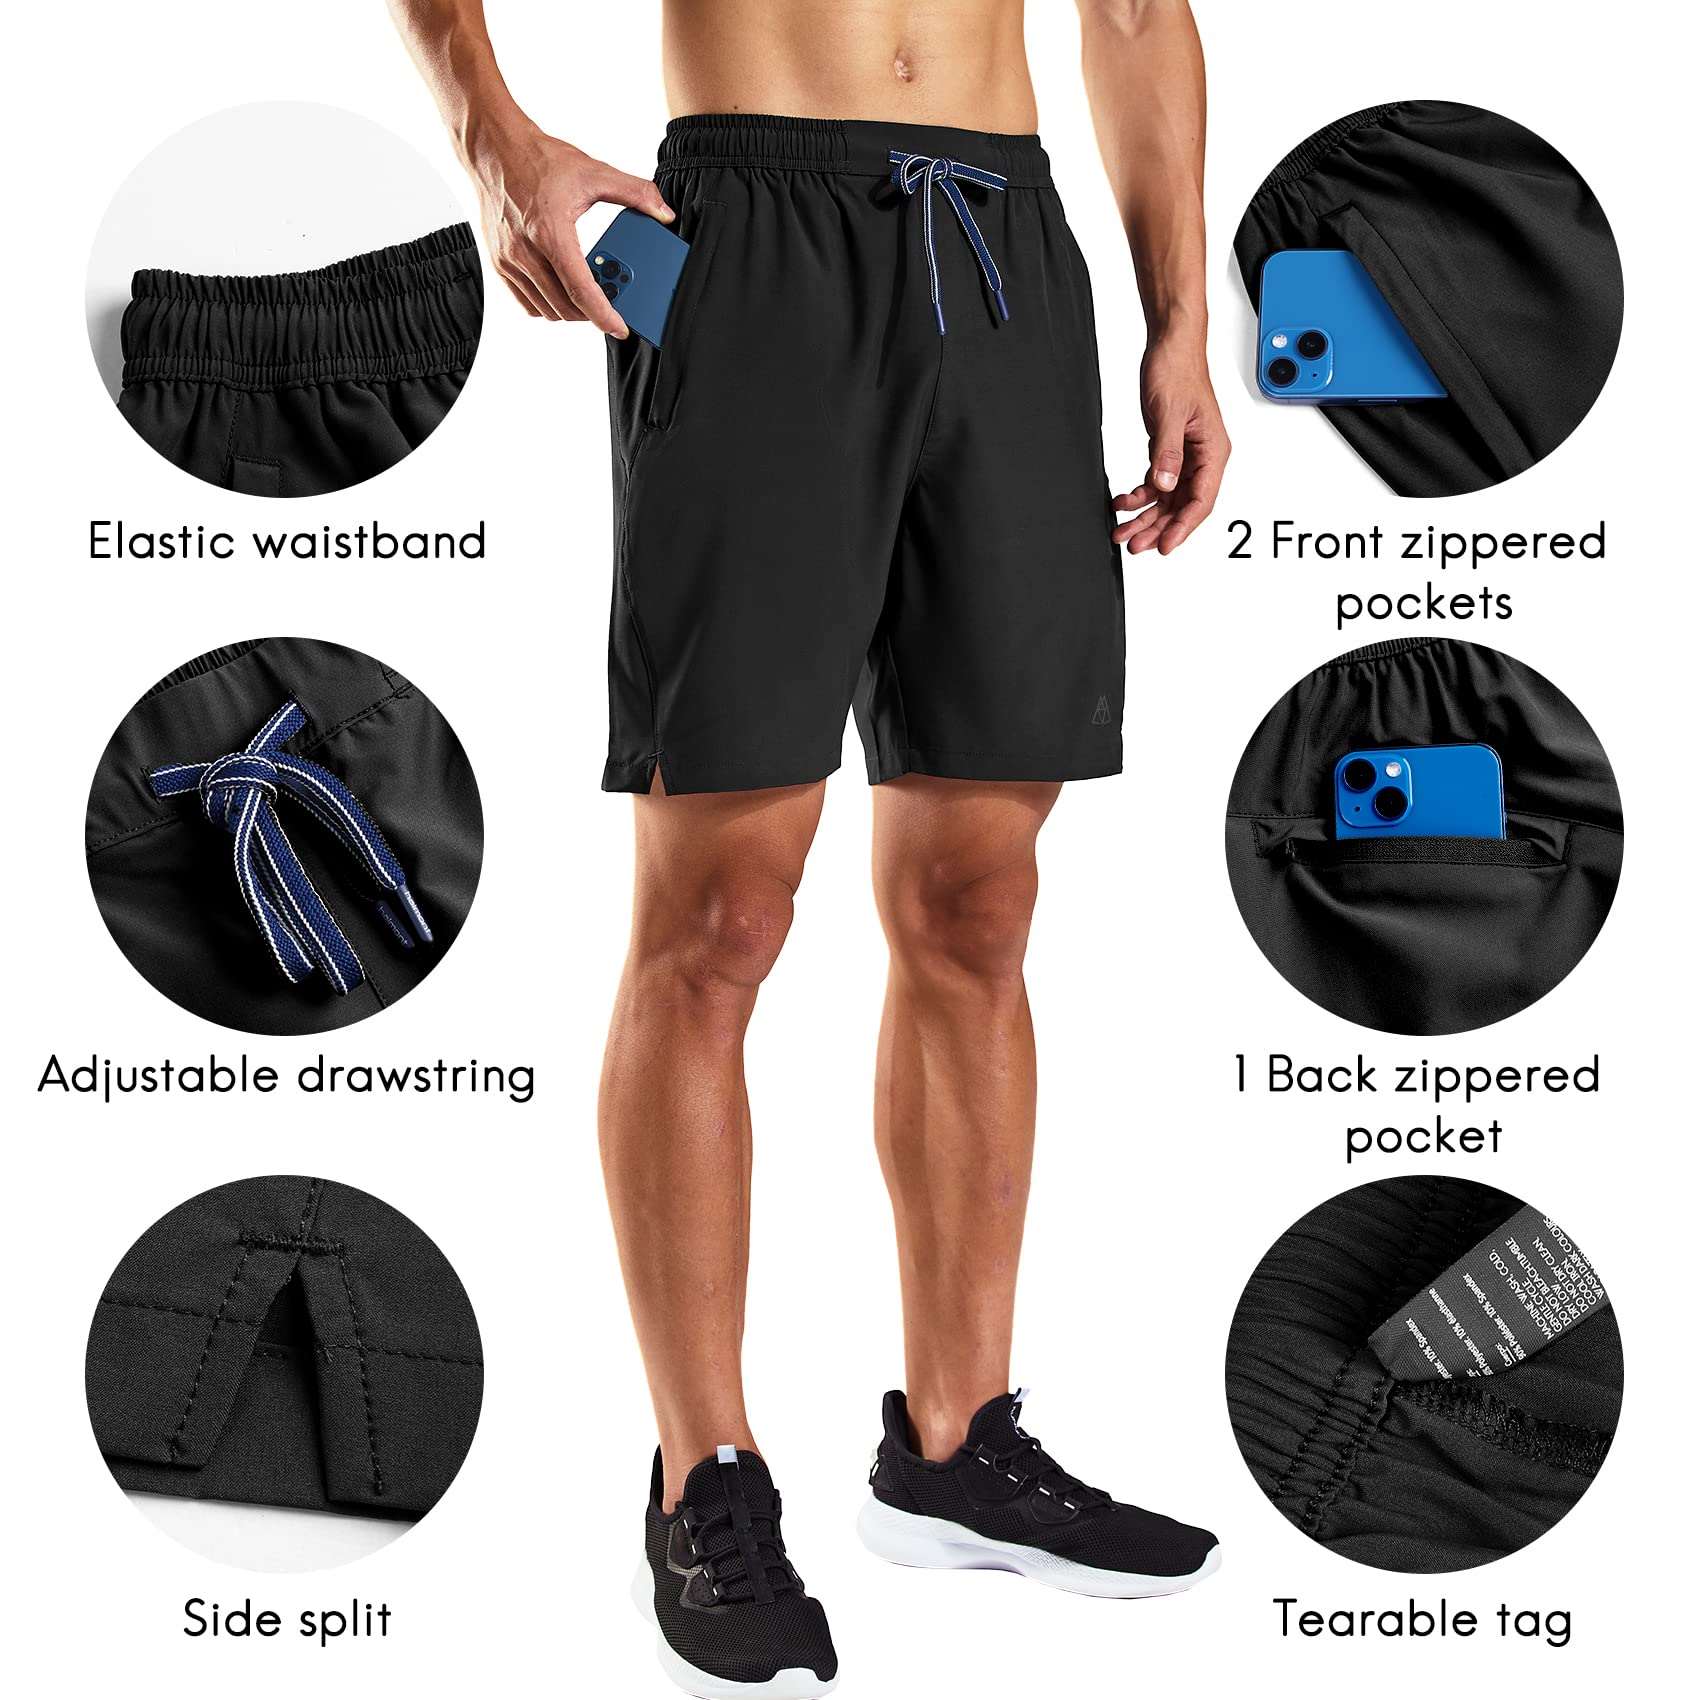 Haimont Men's Dry Fit Running Shorts with Zipper Pockets